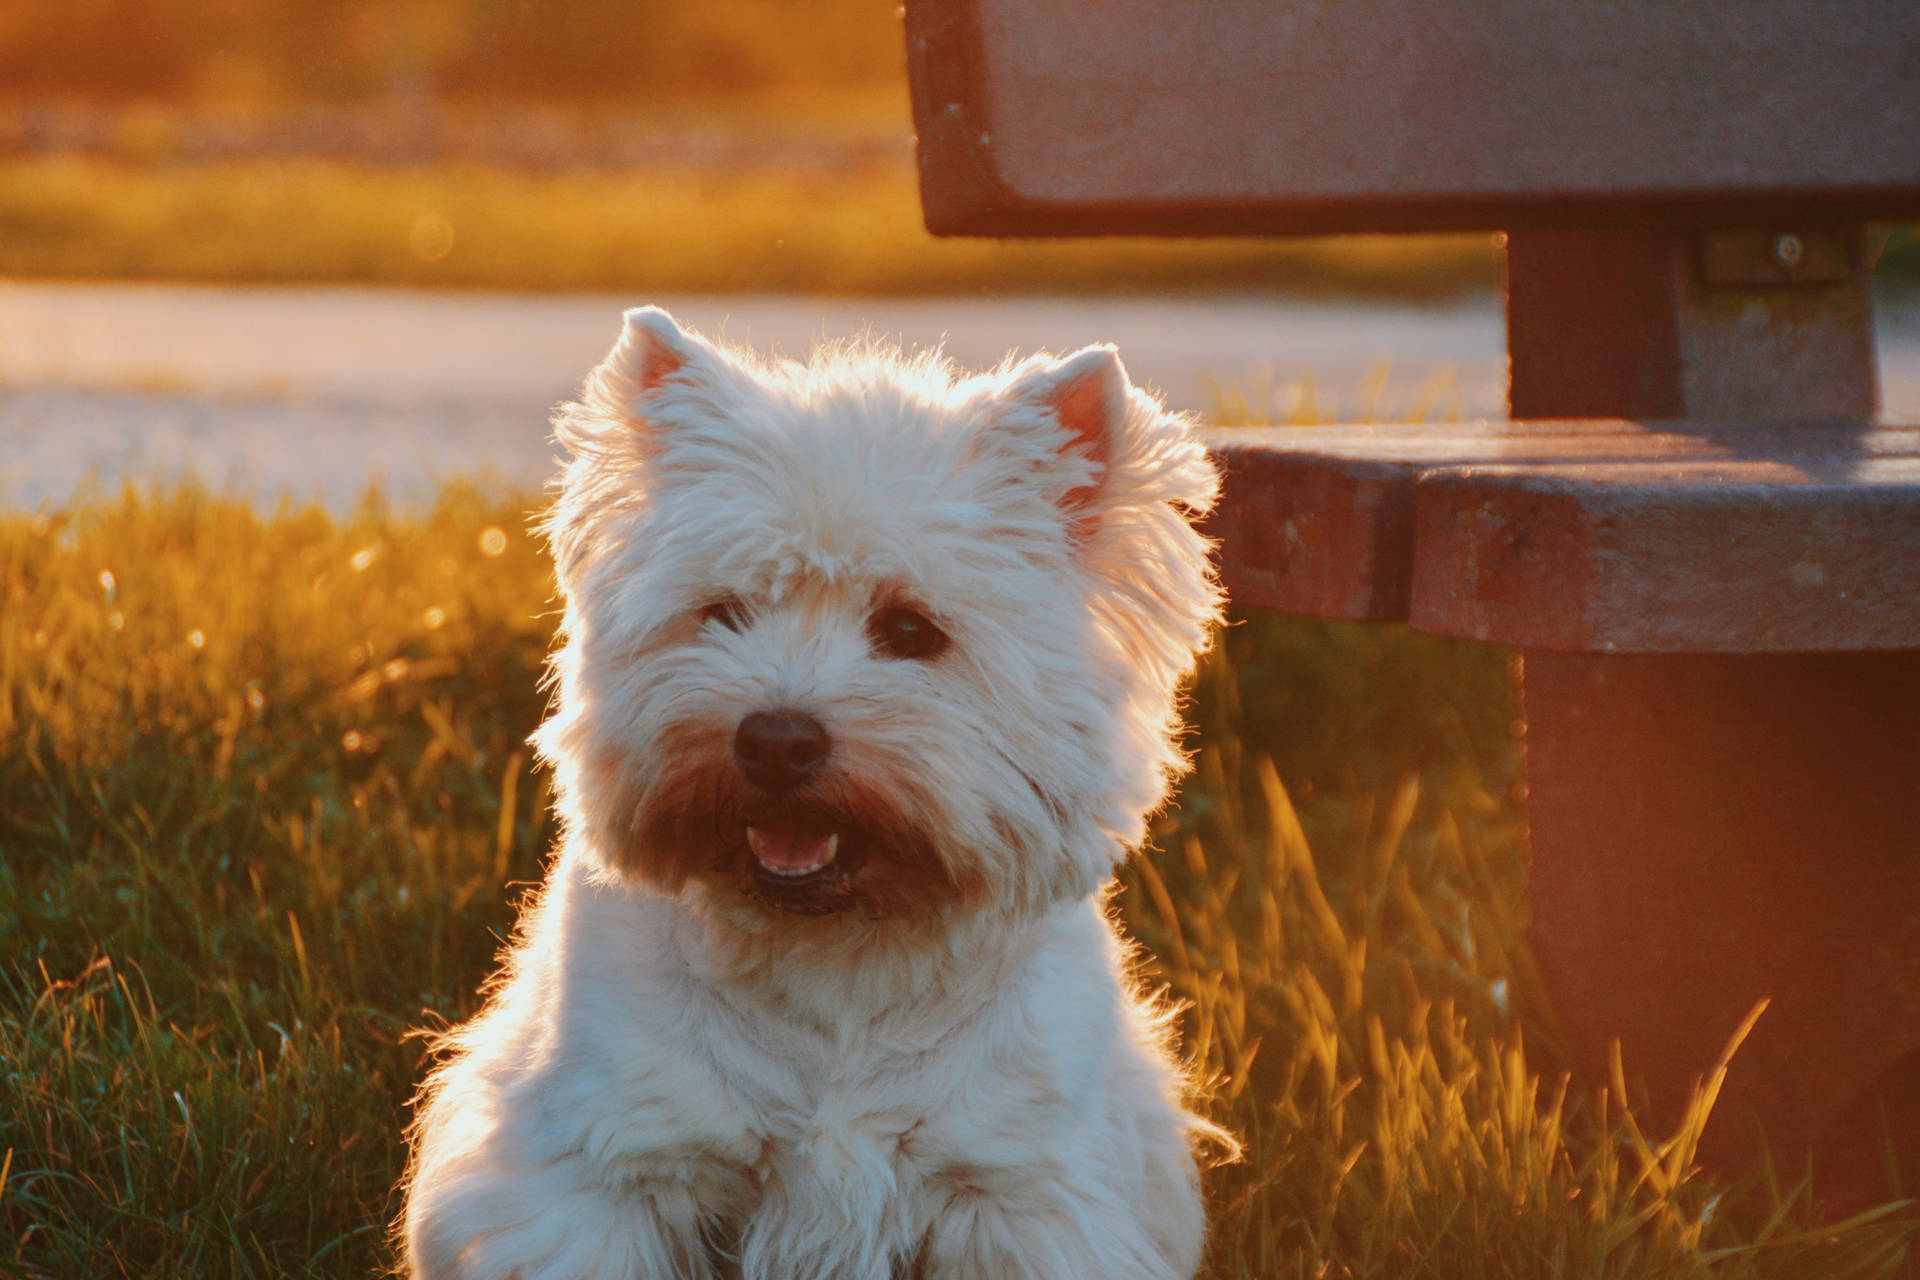 Cute dog wallpaper of White Westie on grass beside a bench at sunset